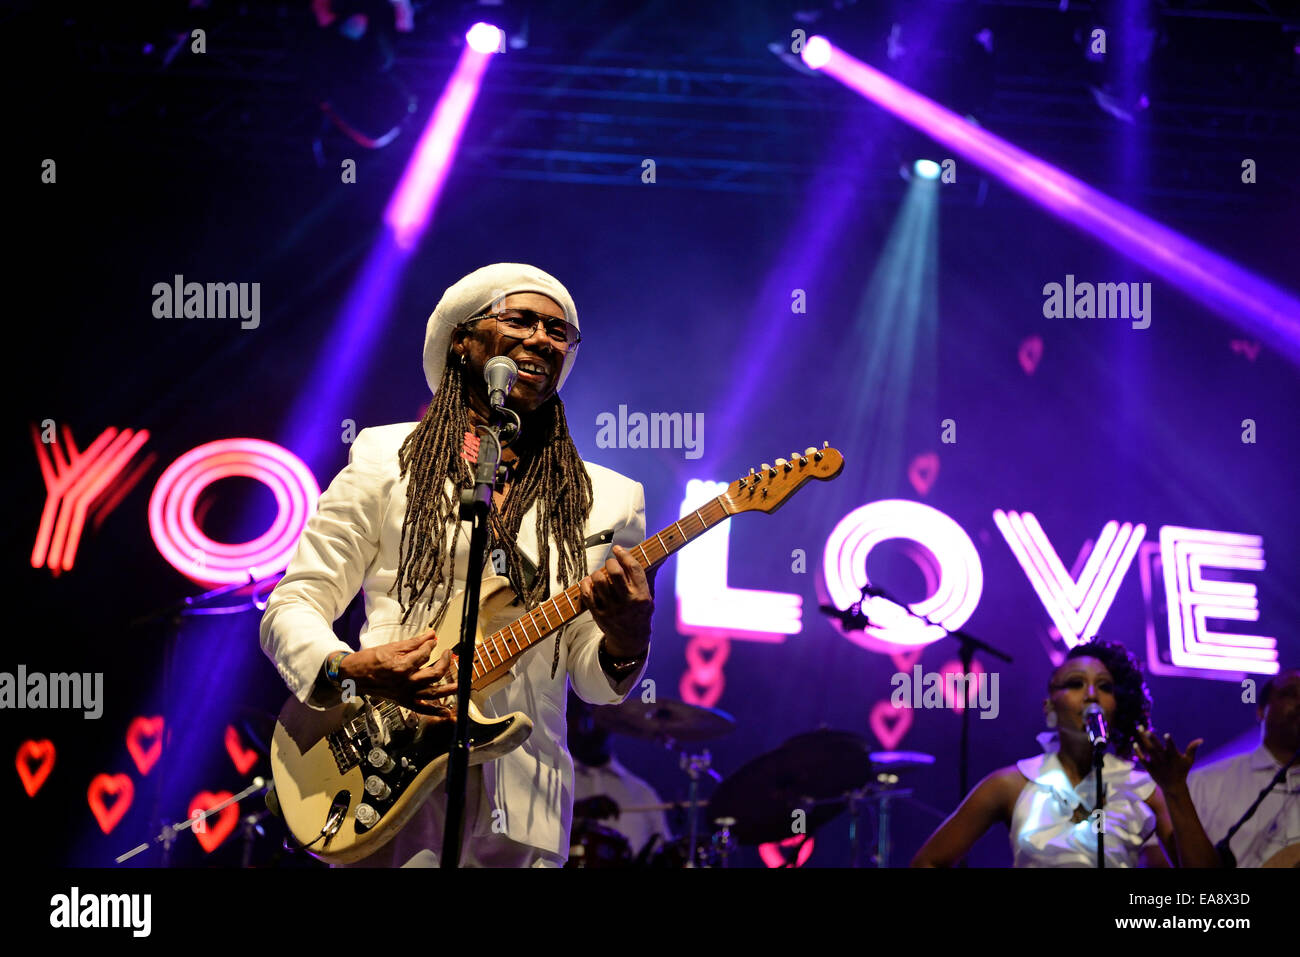 BARCELONA - JUN 14: Chic featuring Nile Rodgers (band) performs at Sonar Festival on June 14, 2014 in Barcelona, Spain. Stock Photo